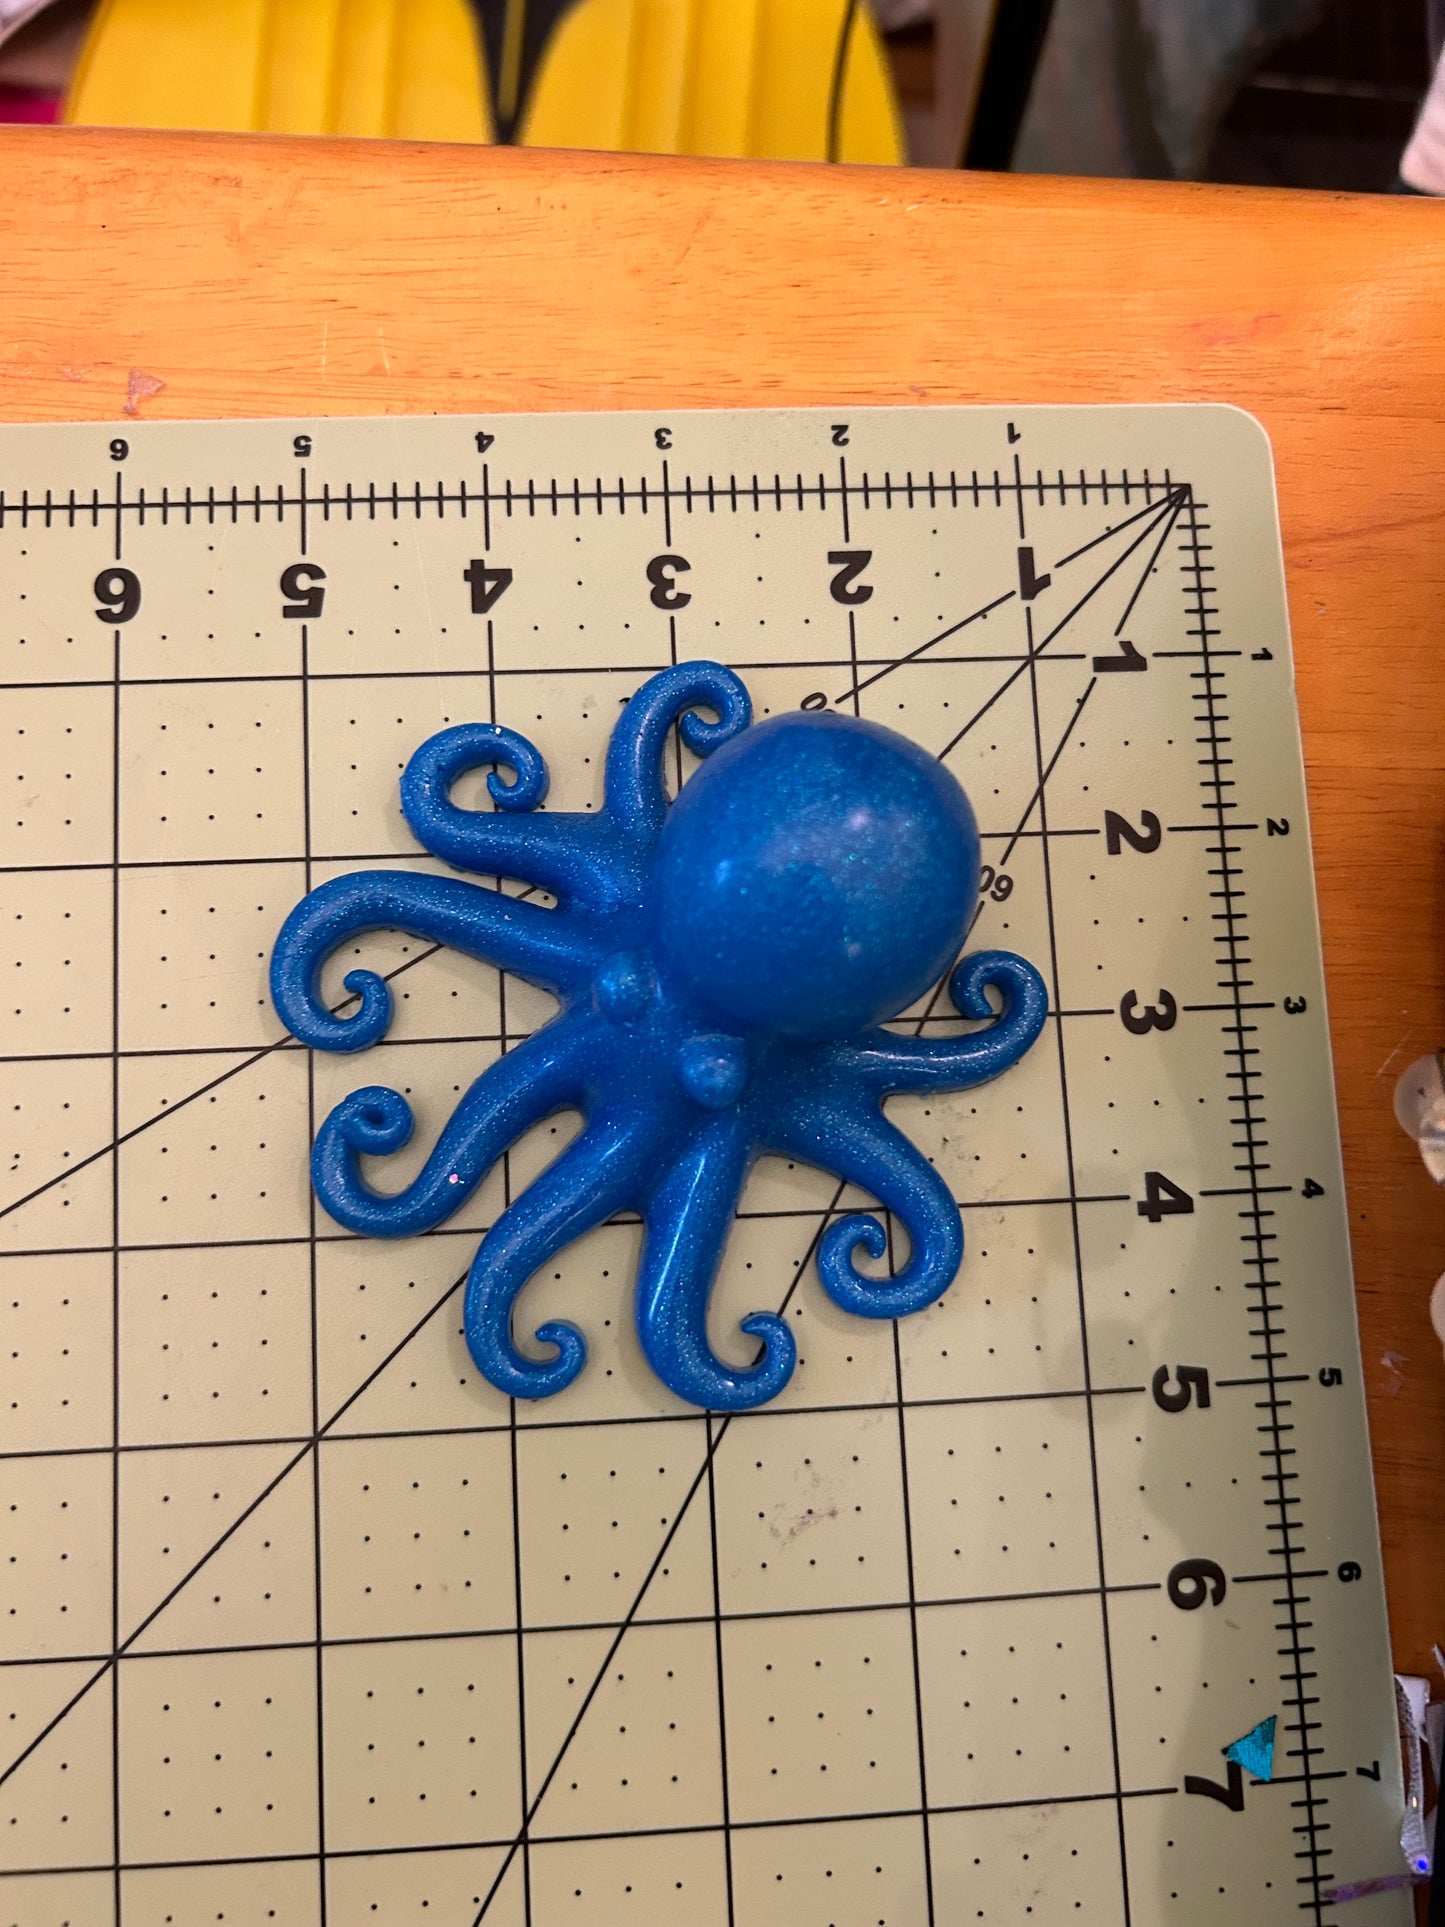 Octopus Silicone Squishy Toy